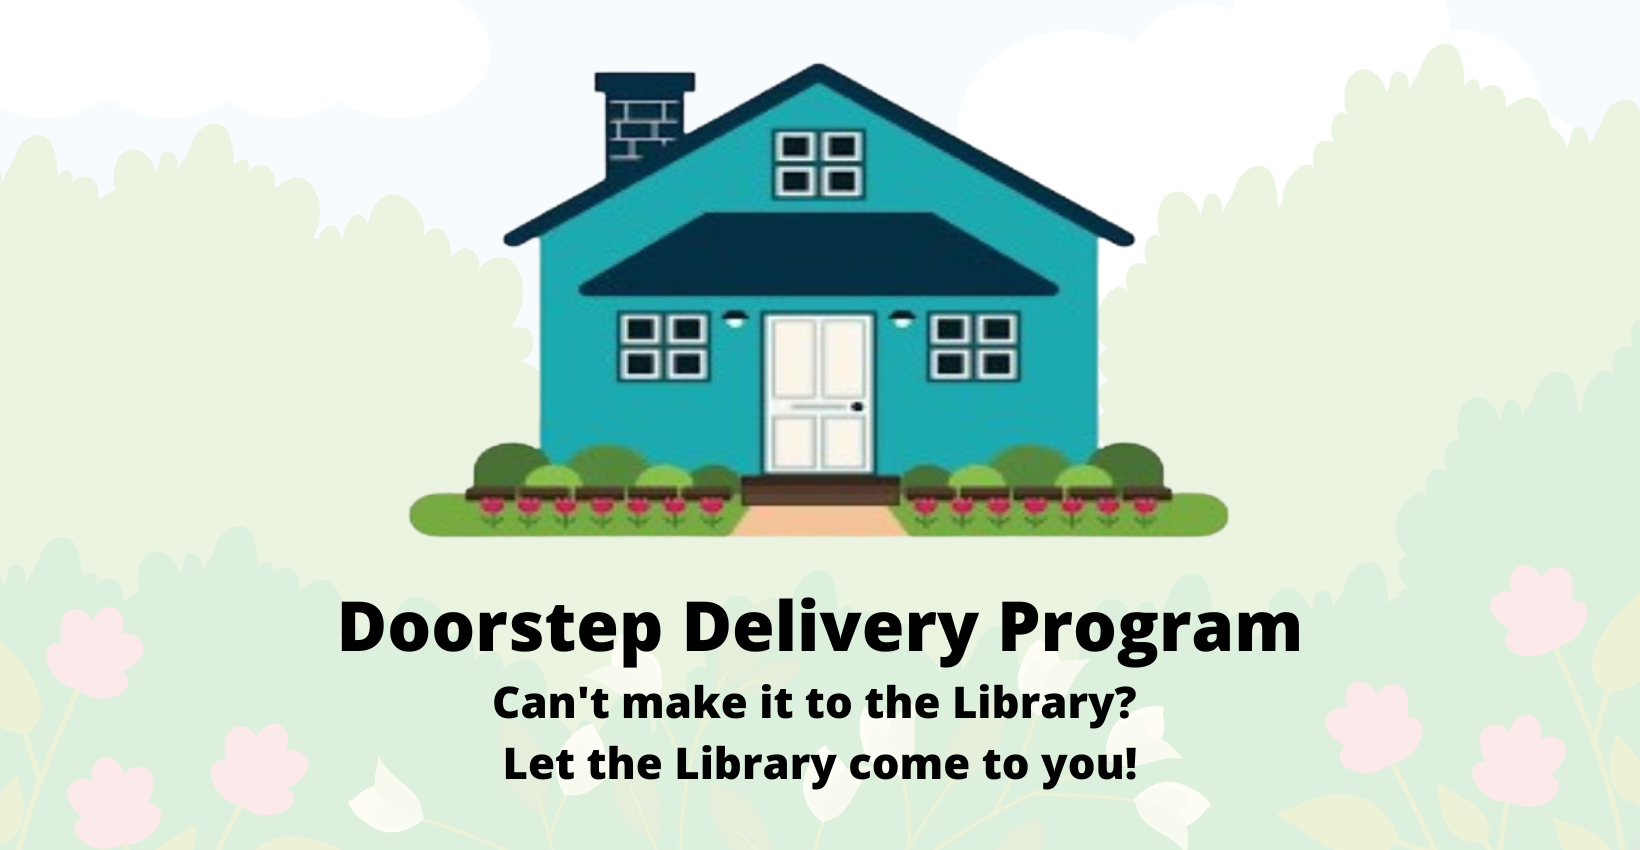 Doorstep Delivery Program, Can't come to the library? Let the library come to you!